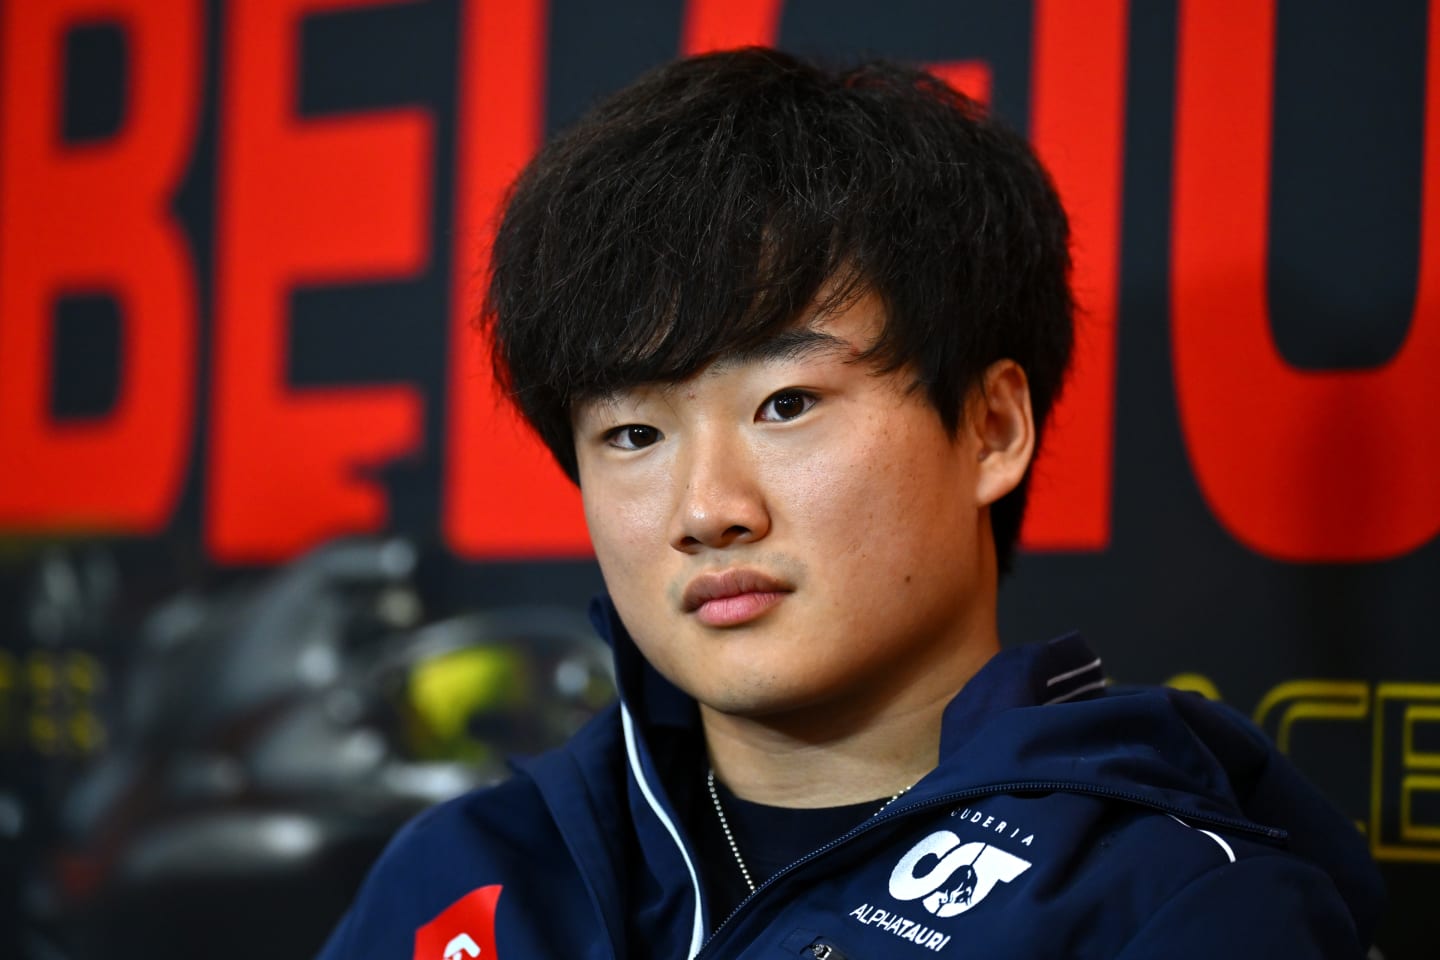 SPA, BELGIUM - JULY 27: Yuki Tsunoda of Japan and Scuderia AlphaTauri attends the Drivers Press Conference during previews ahead of the F1 Grand Prix of Belgium at Circuit de Spa-Francorchamps on July 27, 2023 in Spa, Belgium. (Photo by Dan Mullan/Getty Images)